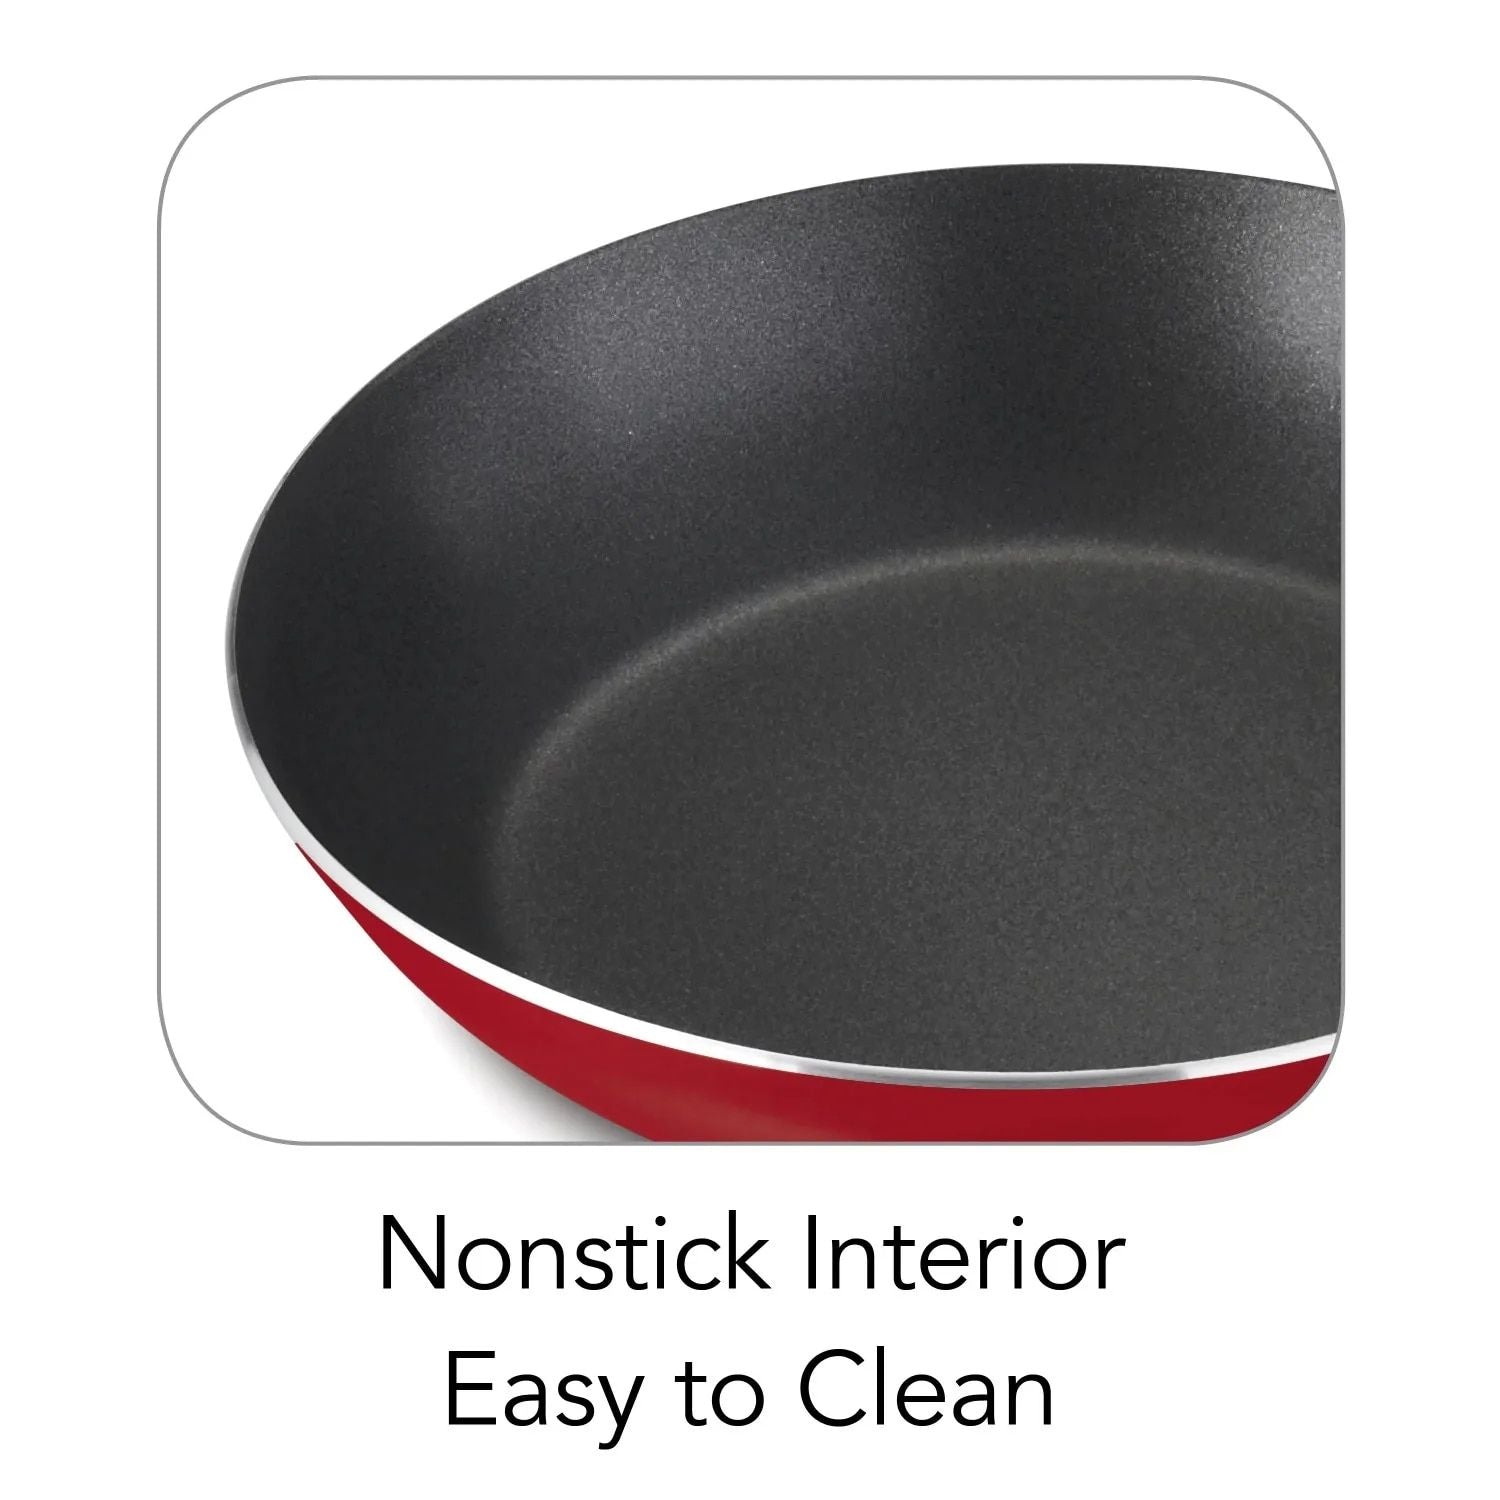 9-Piece Non-stick Cookware Set for Everyday Cooking